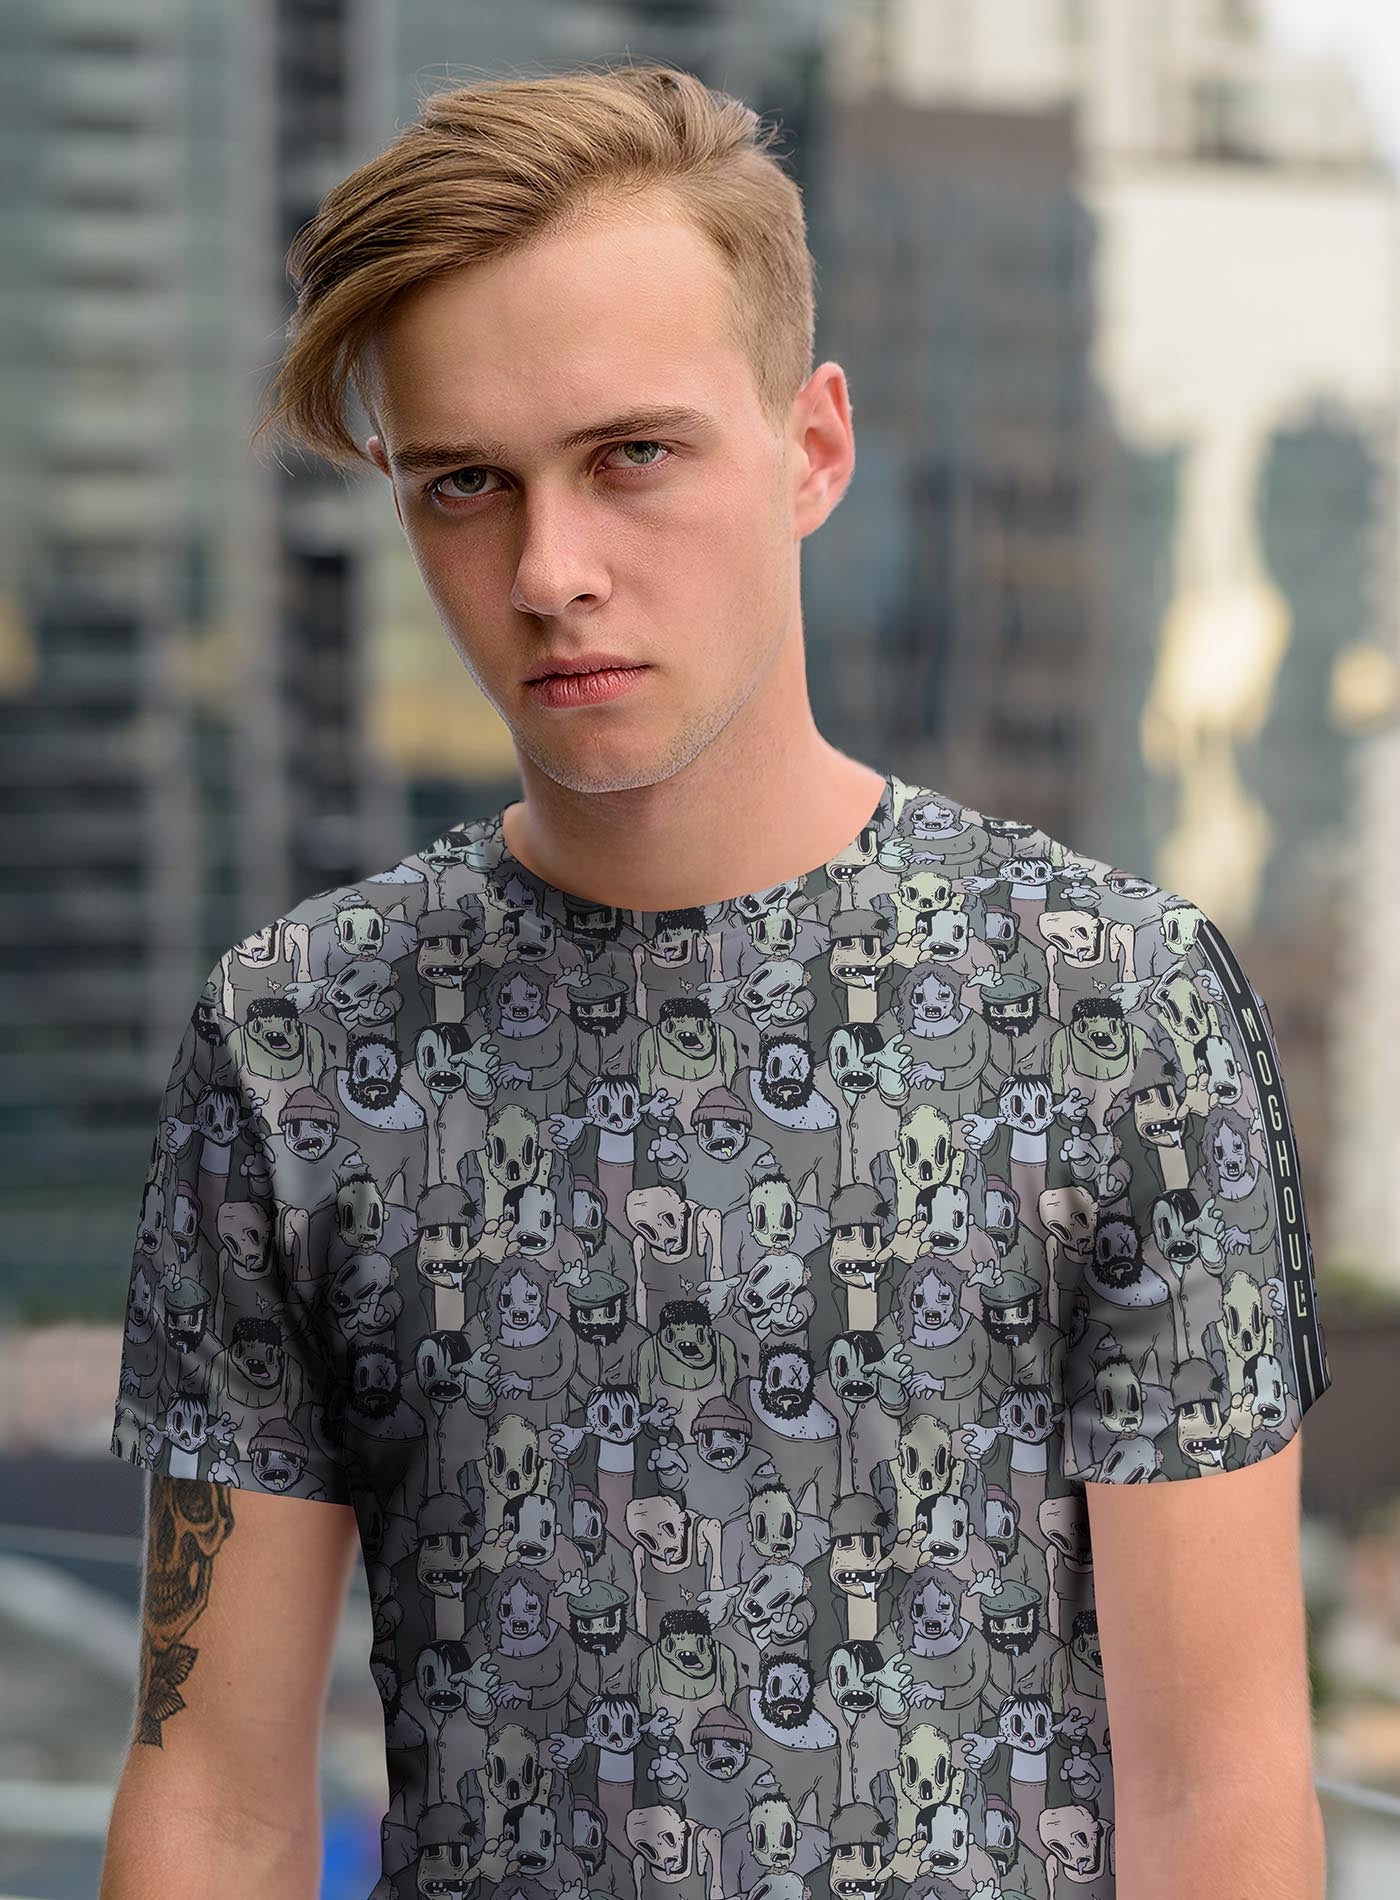 Man modeling an All over dye sublimation t-shirt featuring retro illustrated zombies by Sasha Sidorovich.